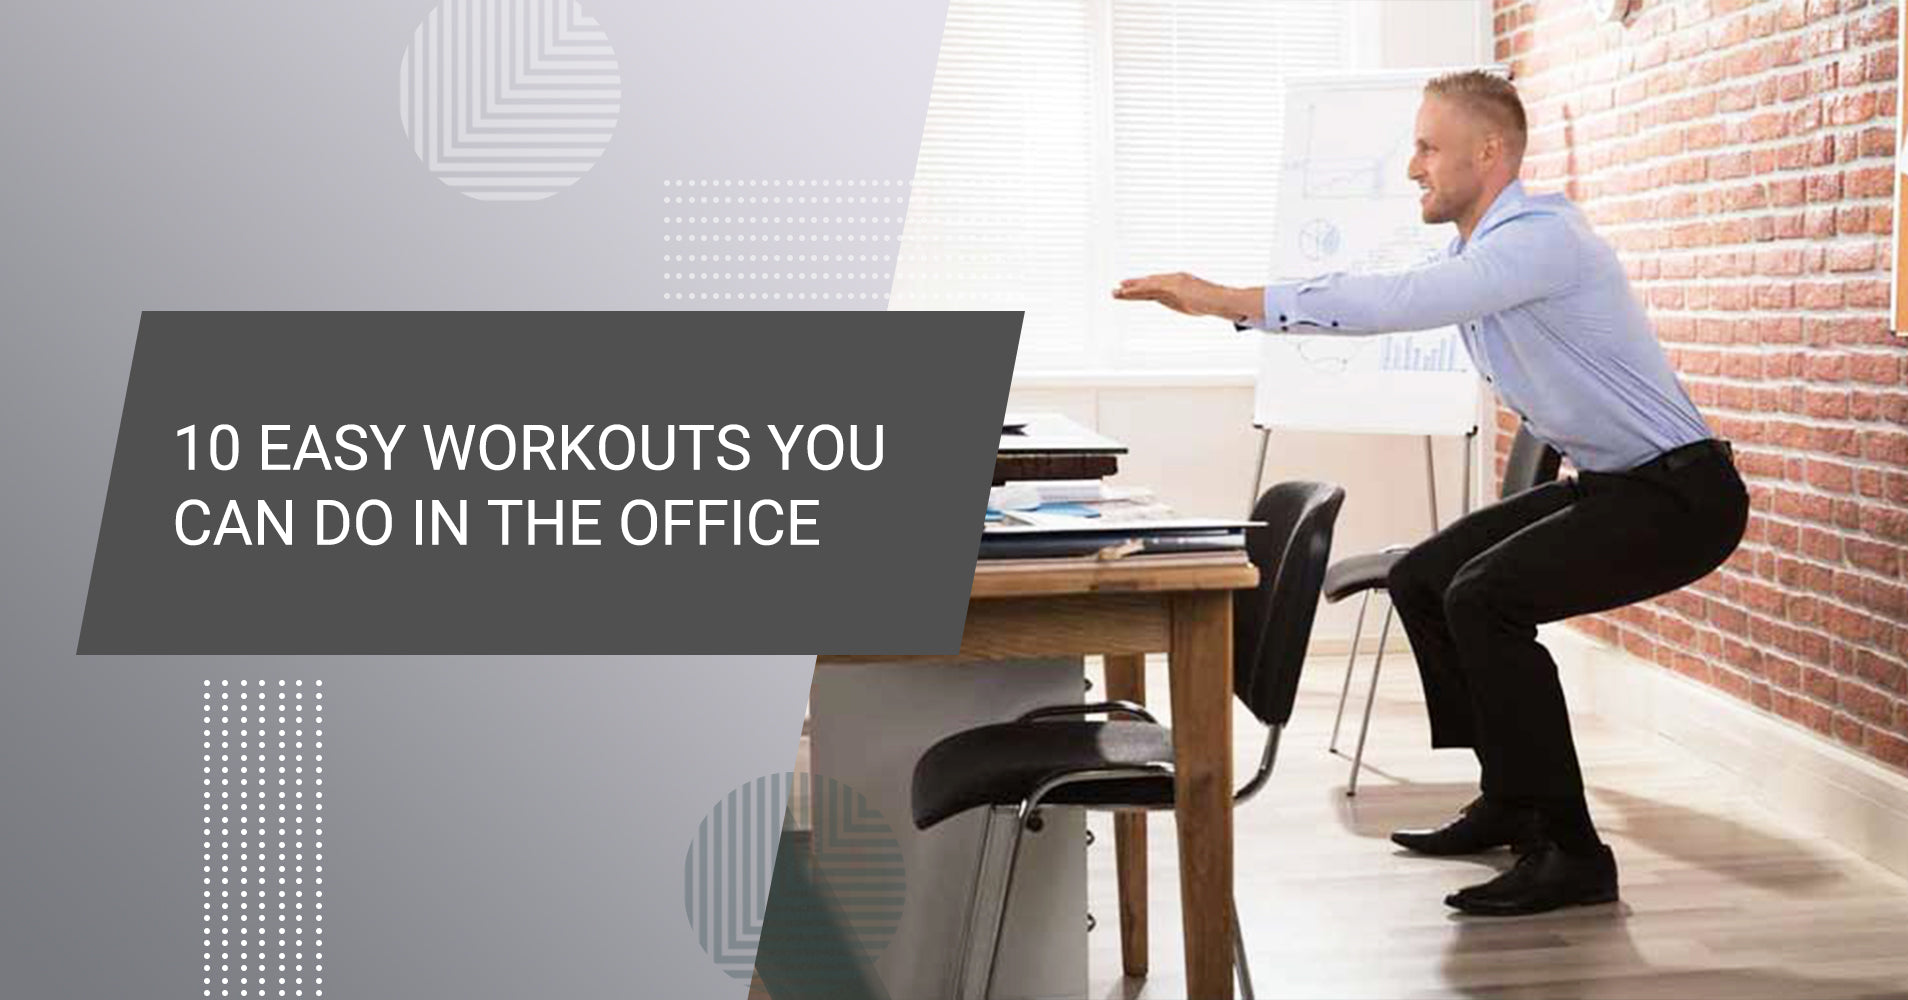 http://flujostore.com/cdn/shop/articles/10_Easy_Workouts_you_can_do_in_the_office.jpg?v=1680076167&width=2048